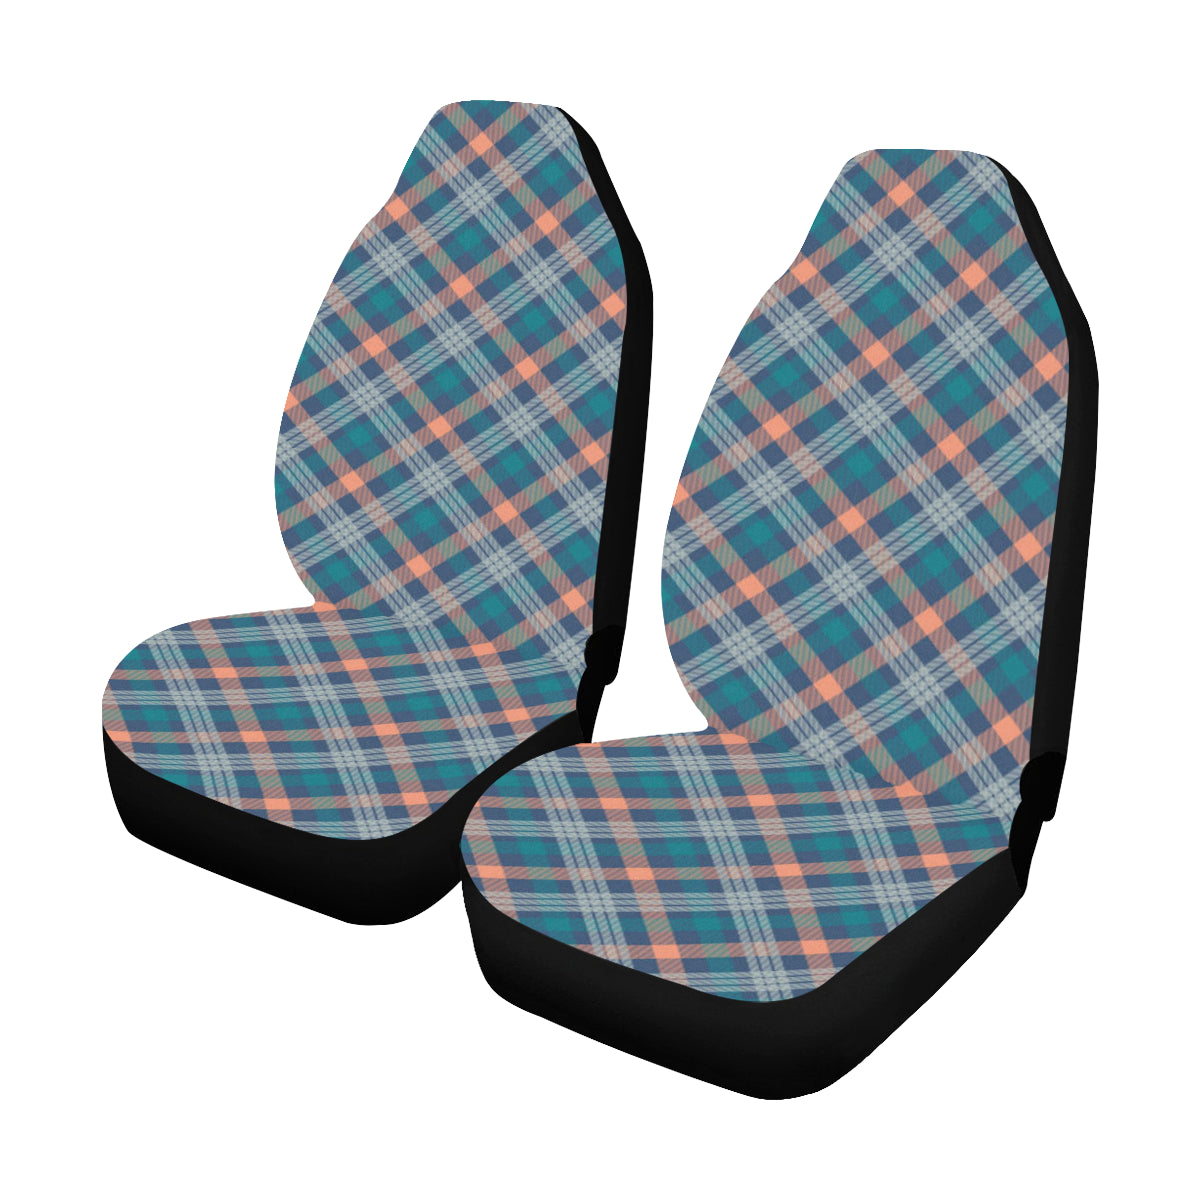 Blue Tartan Plaid Car Seat Covers Set 2 pc, Orange Check Pattern Front Seat Covers, Car SUV Seat Protector Accessory Starcove Fashion